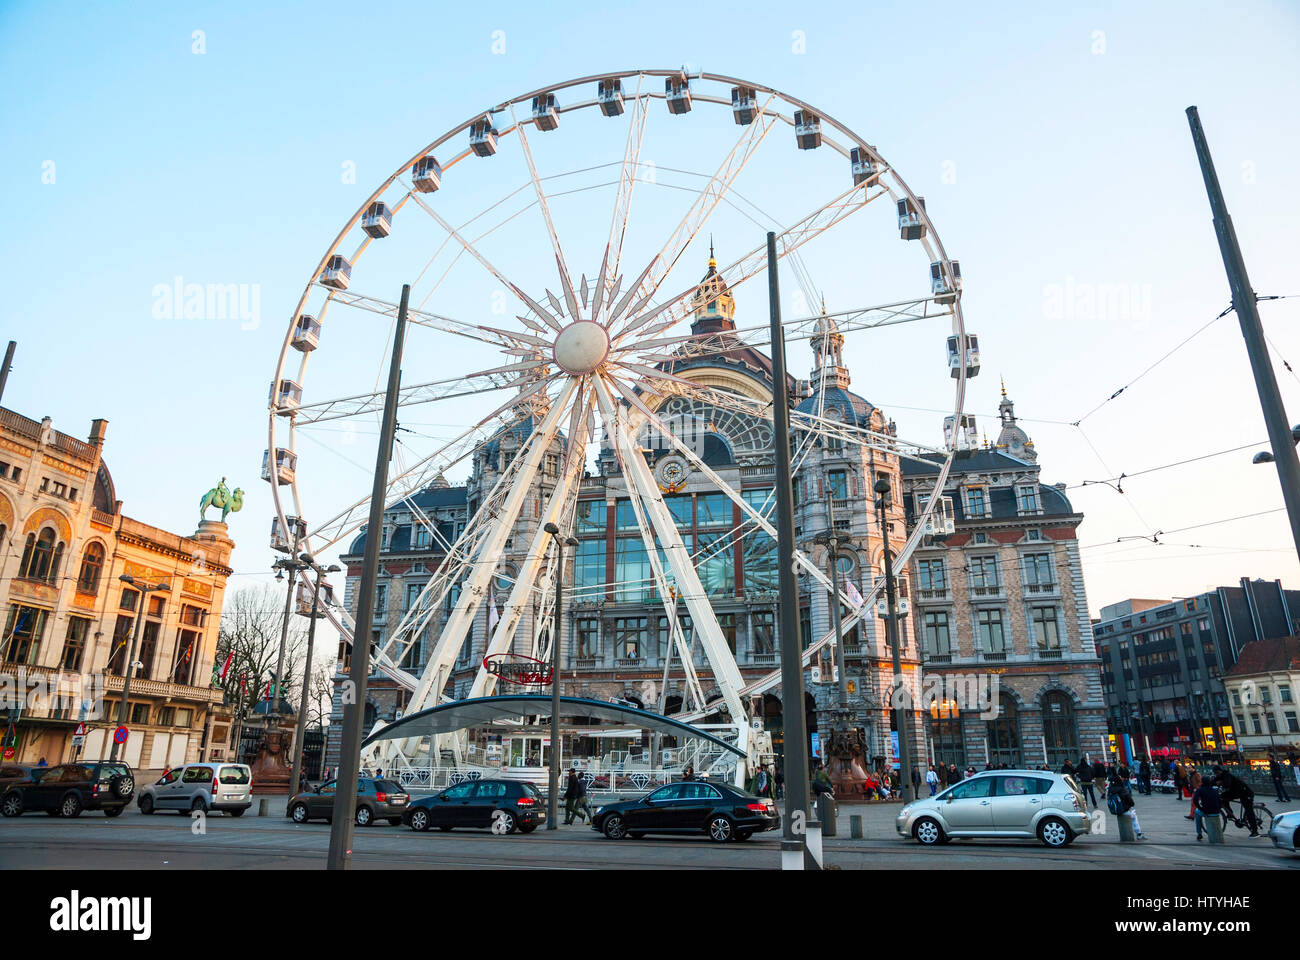 ANTWERP, BELGIUM - MARCH 17:  The exterior of Antwerp central train station on March 17, 2015 Stock Photo